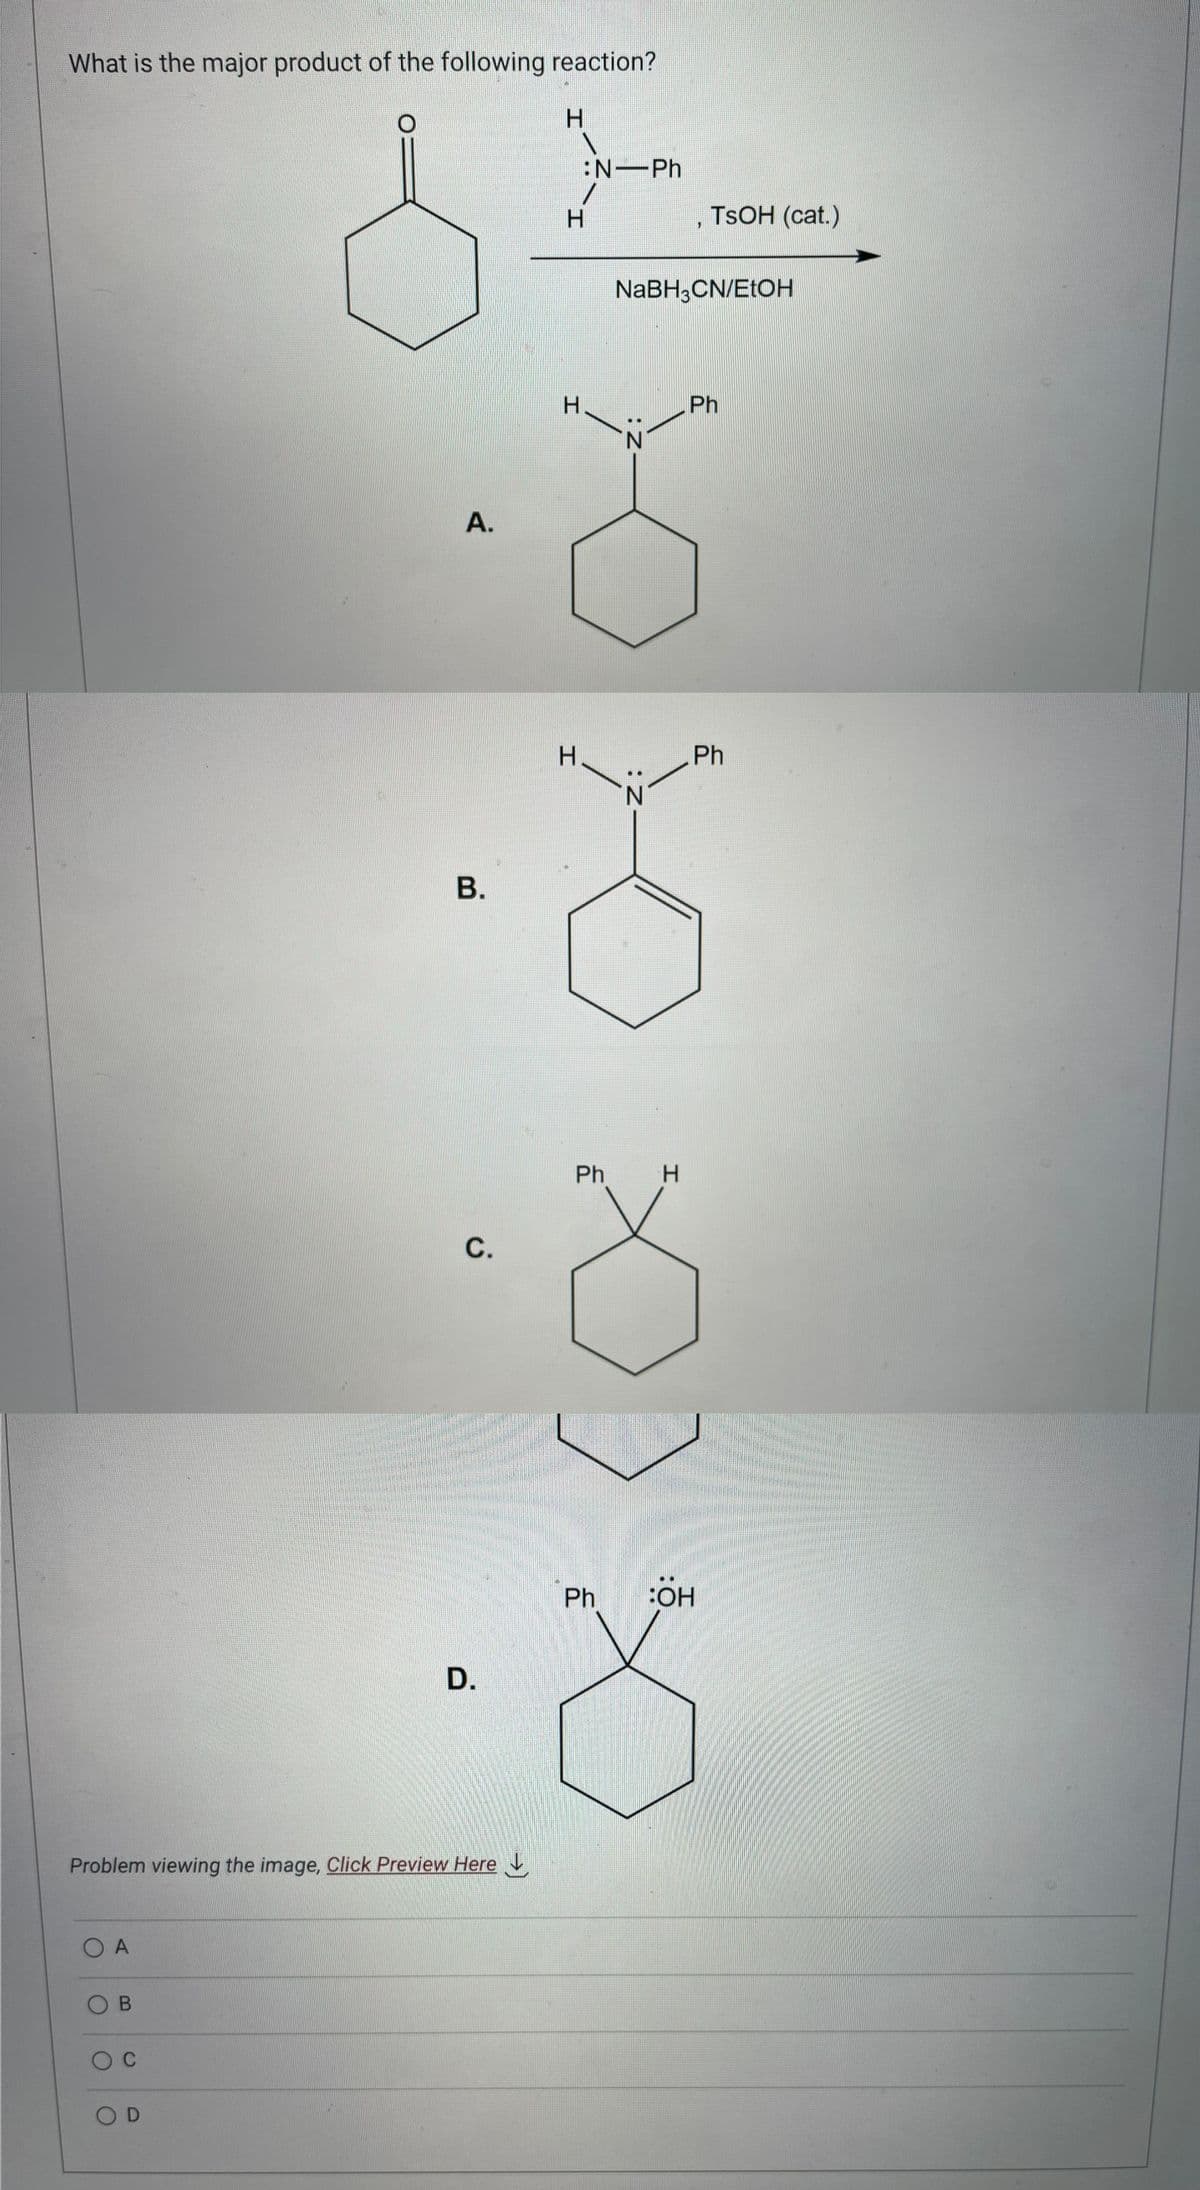 What is the major product of the following reaction?
O A
OB
O C
A.
Problem viewing the image. Click Preview Here
OD
B.
C.
D.
H
1
:N-Ph
1
H
Н.
H
Ph
NaBH3CN/EtOH
:Z
: Z-
N
H
TSOH (cat.)
Ph
Ph
Ph BOH